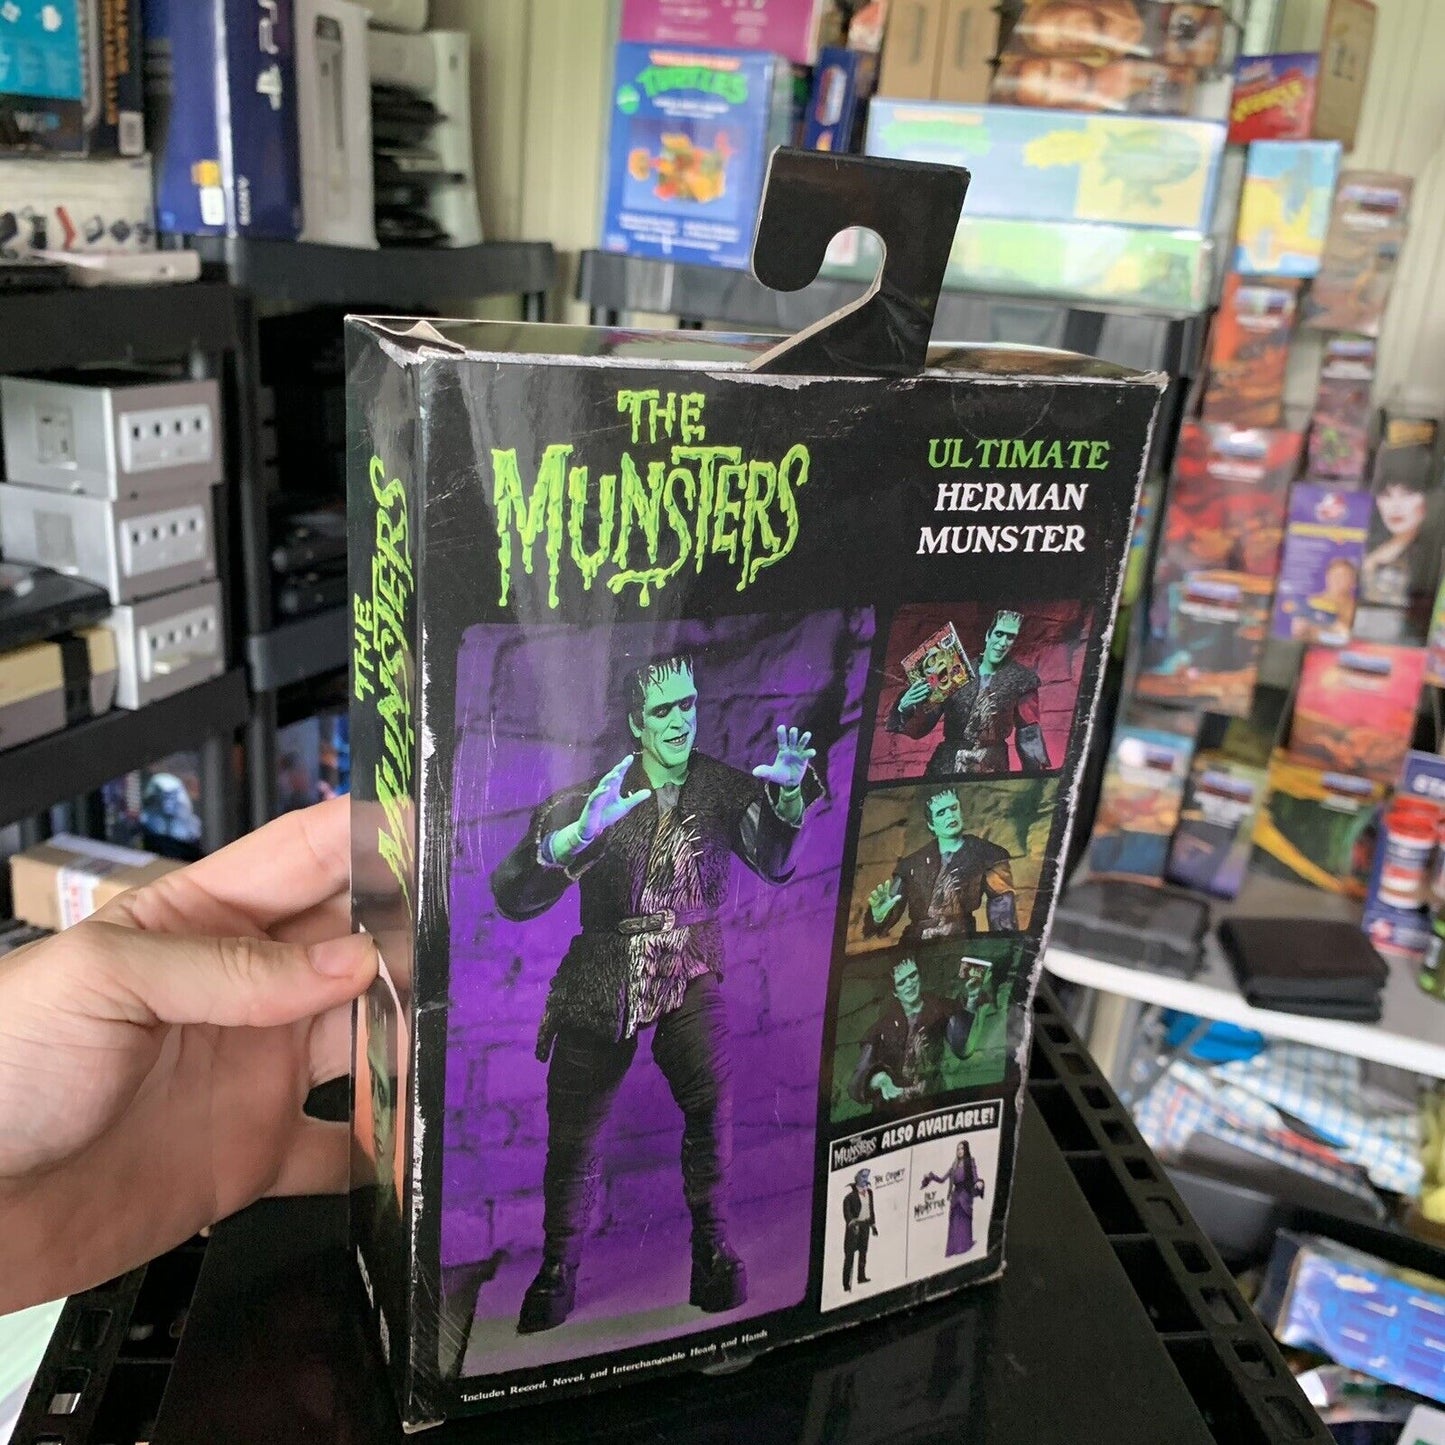 NECA Herman Munster The Munsters Ultimate 7" Action Figure 1:12 Scale Official